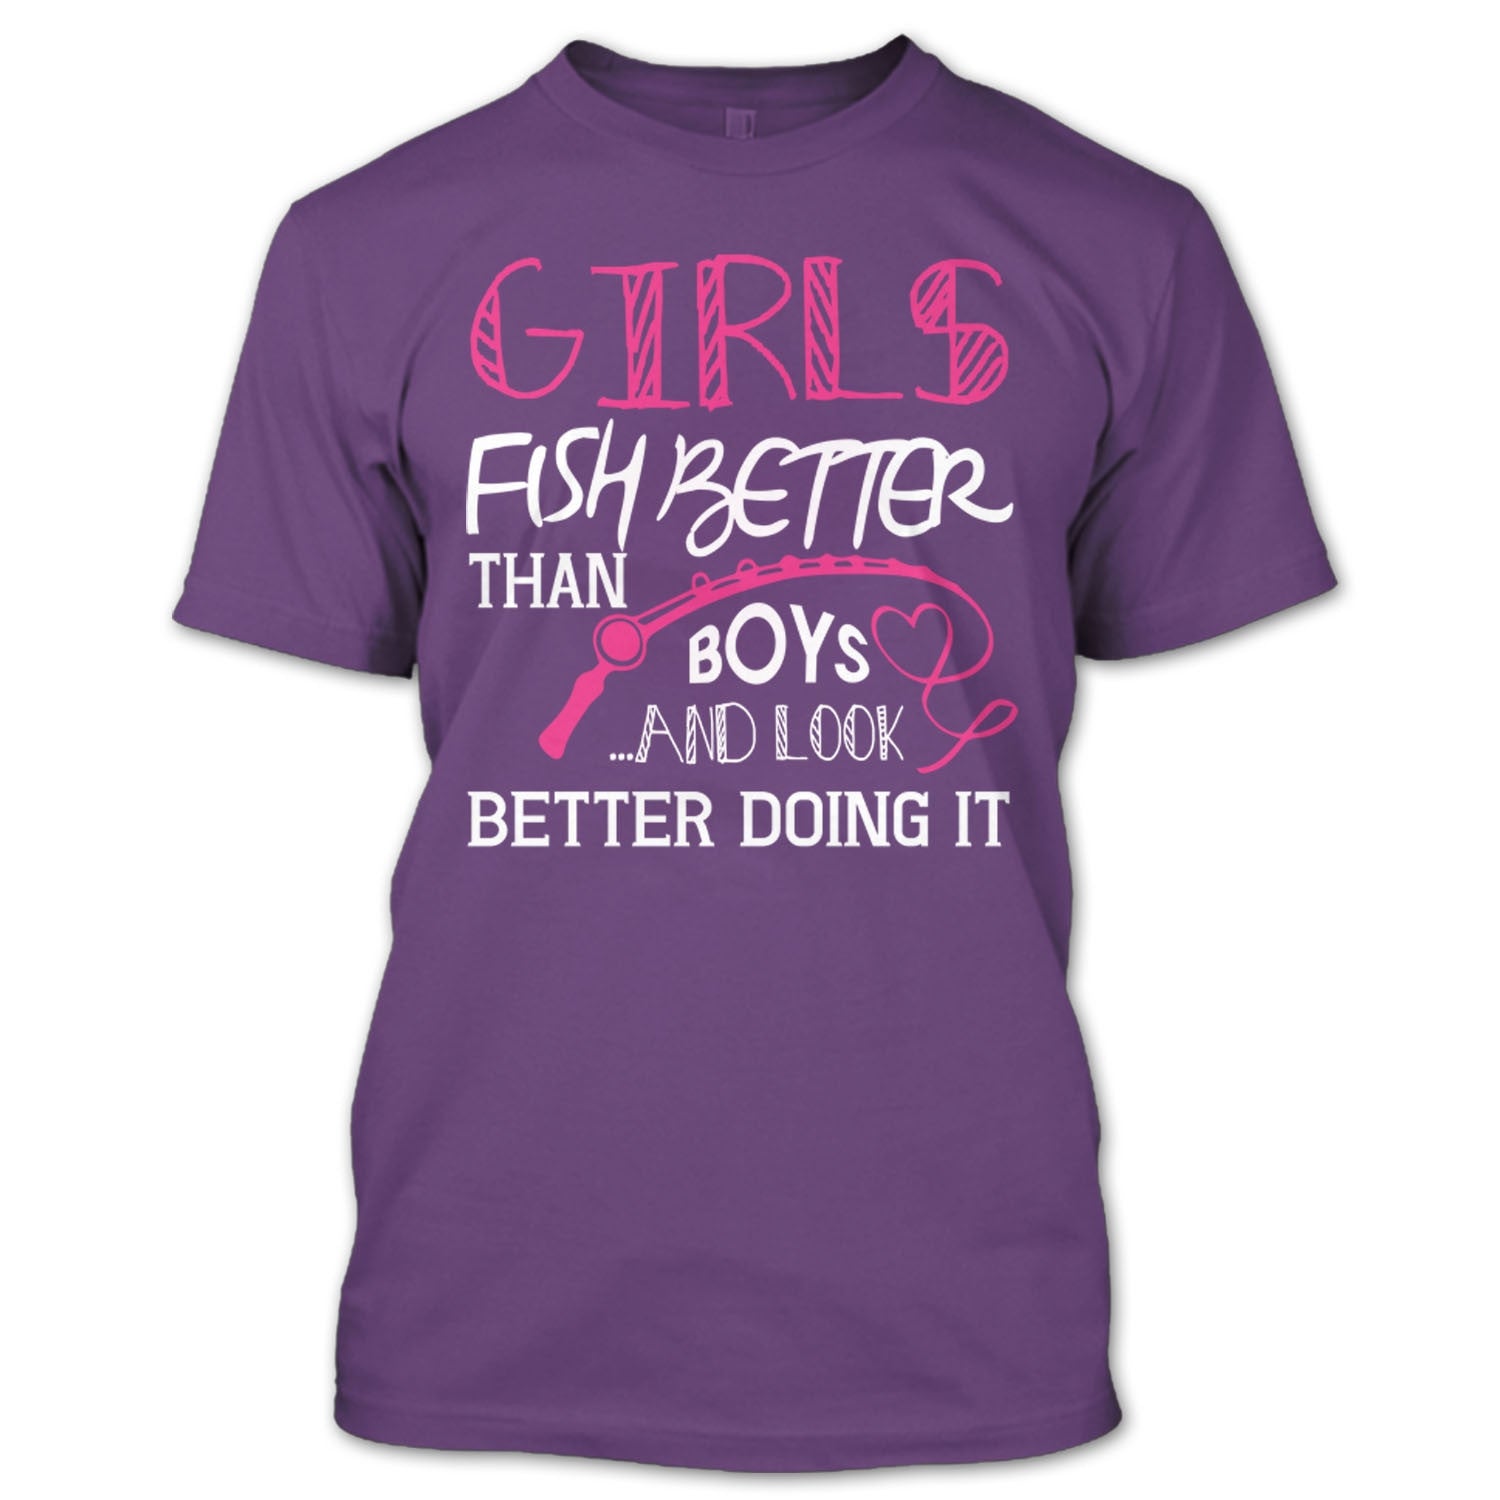 Girls Fish Better Than Boys And Look Better Dong It T Shirt